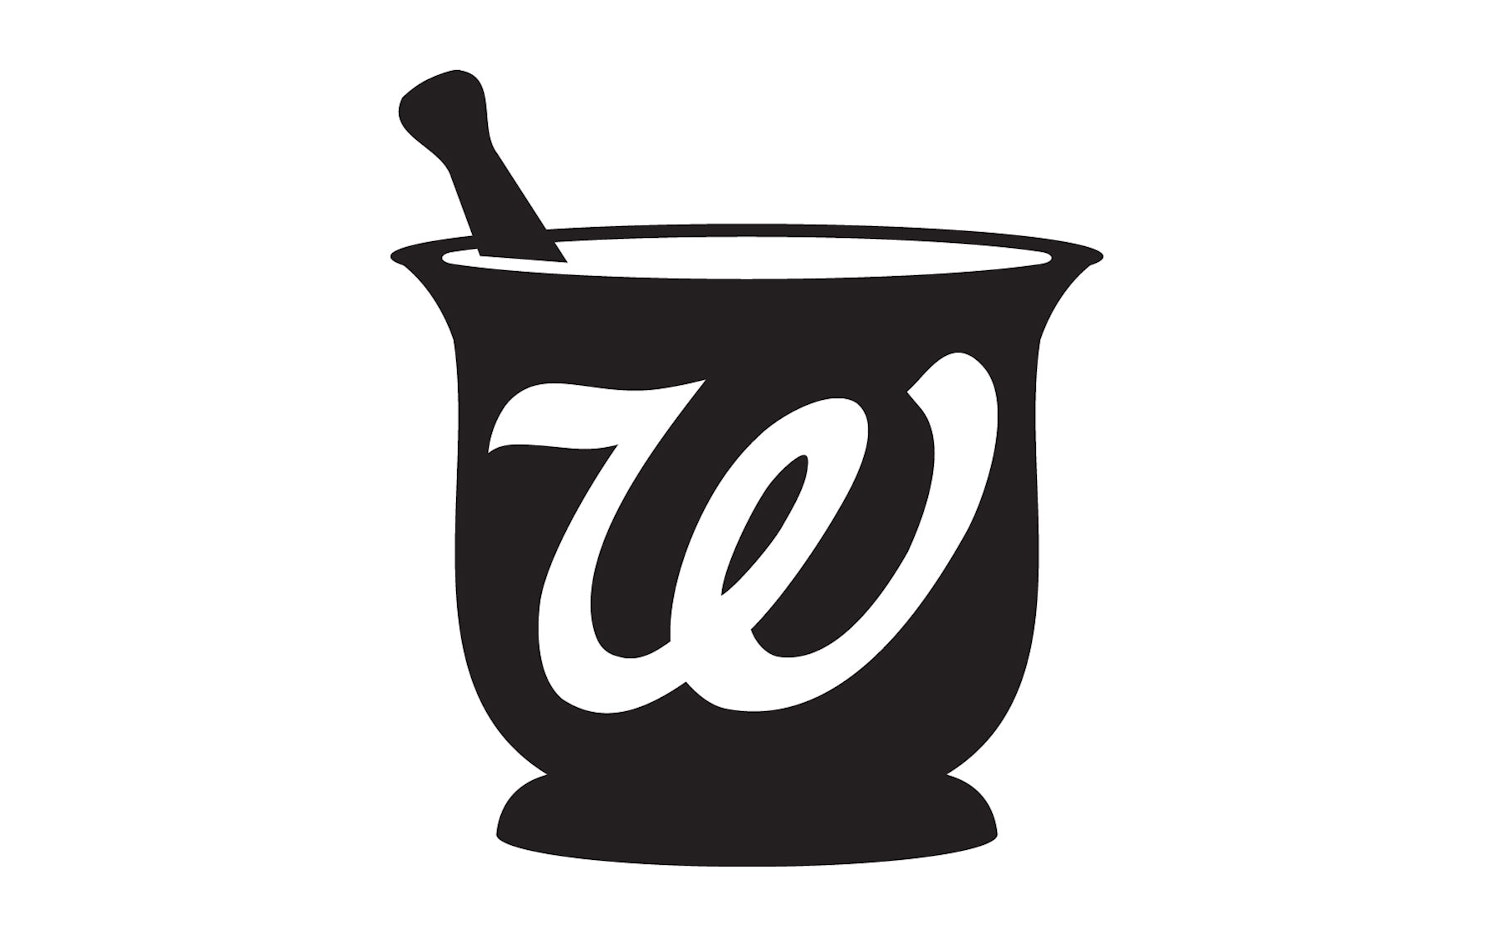 Walgreens download vector logo and get Walgreens brand information and